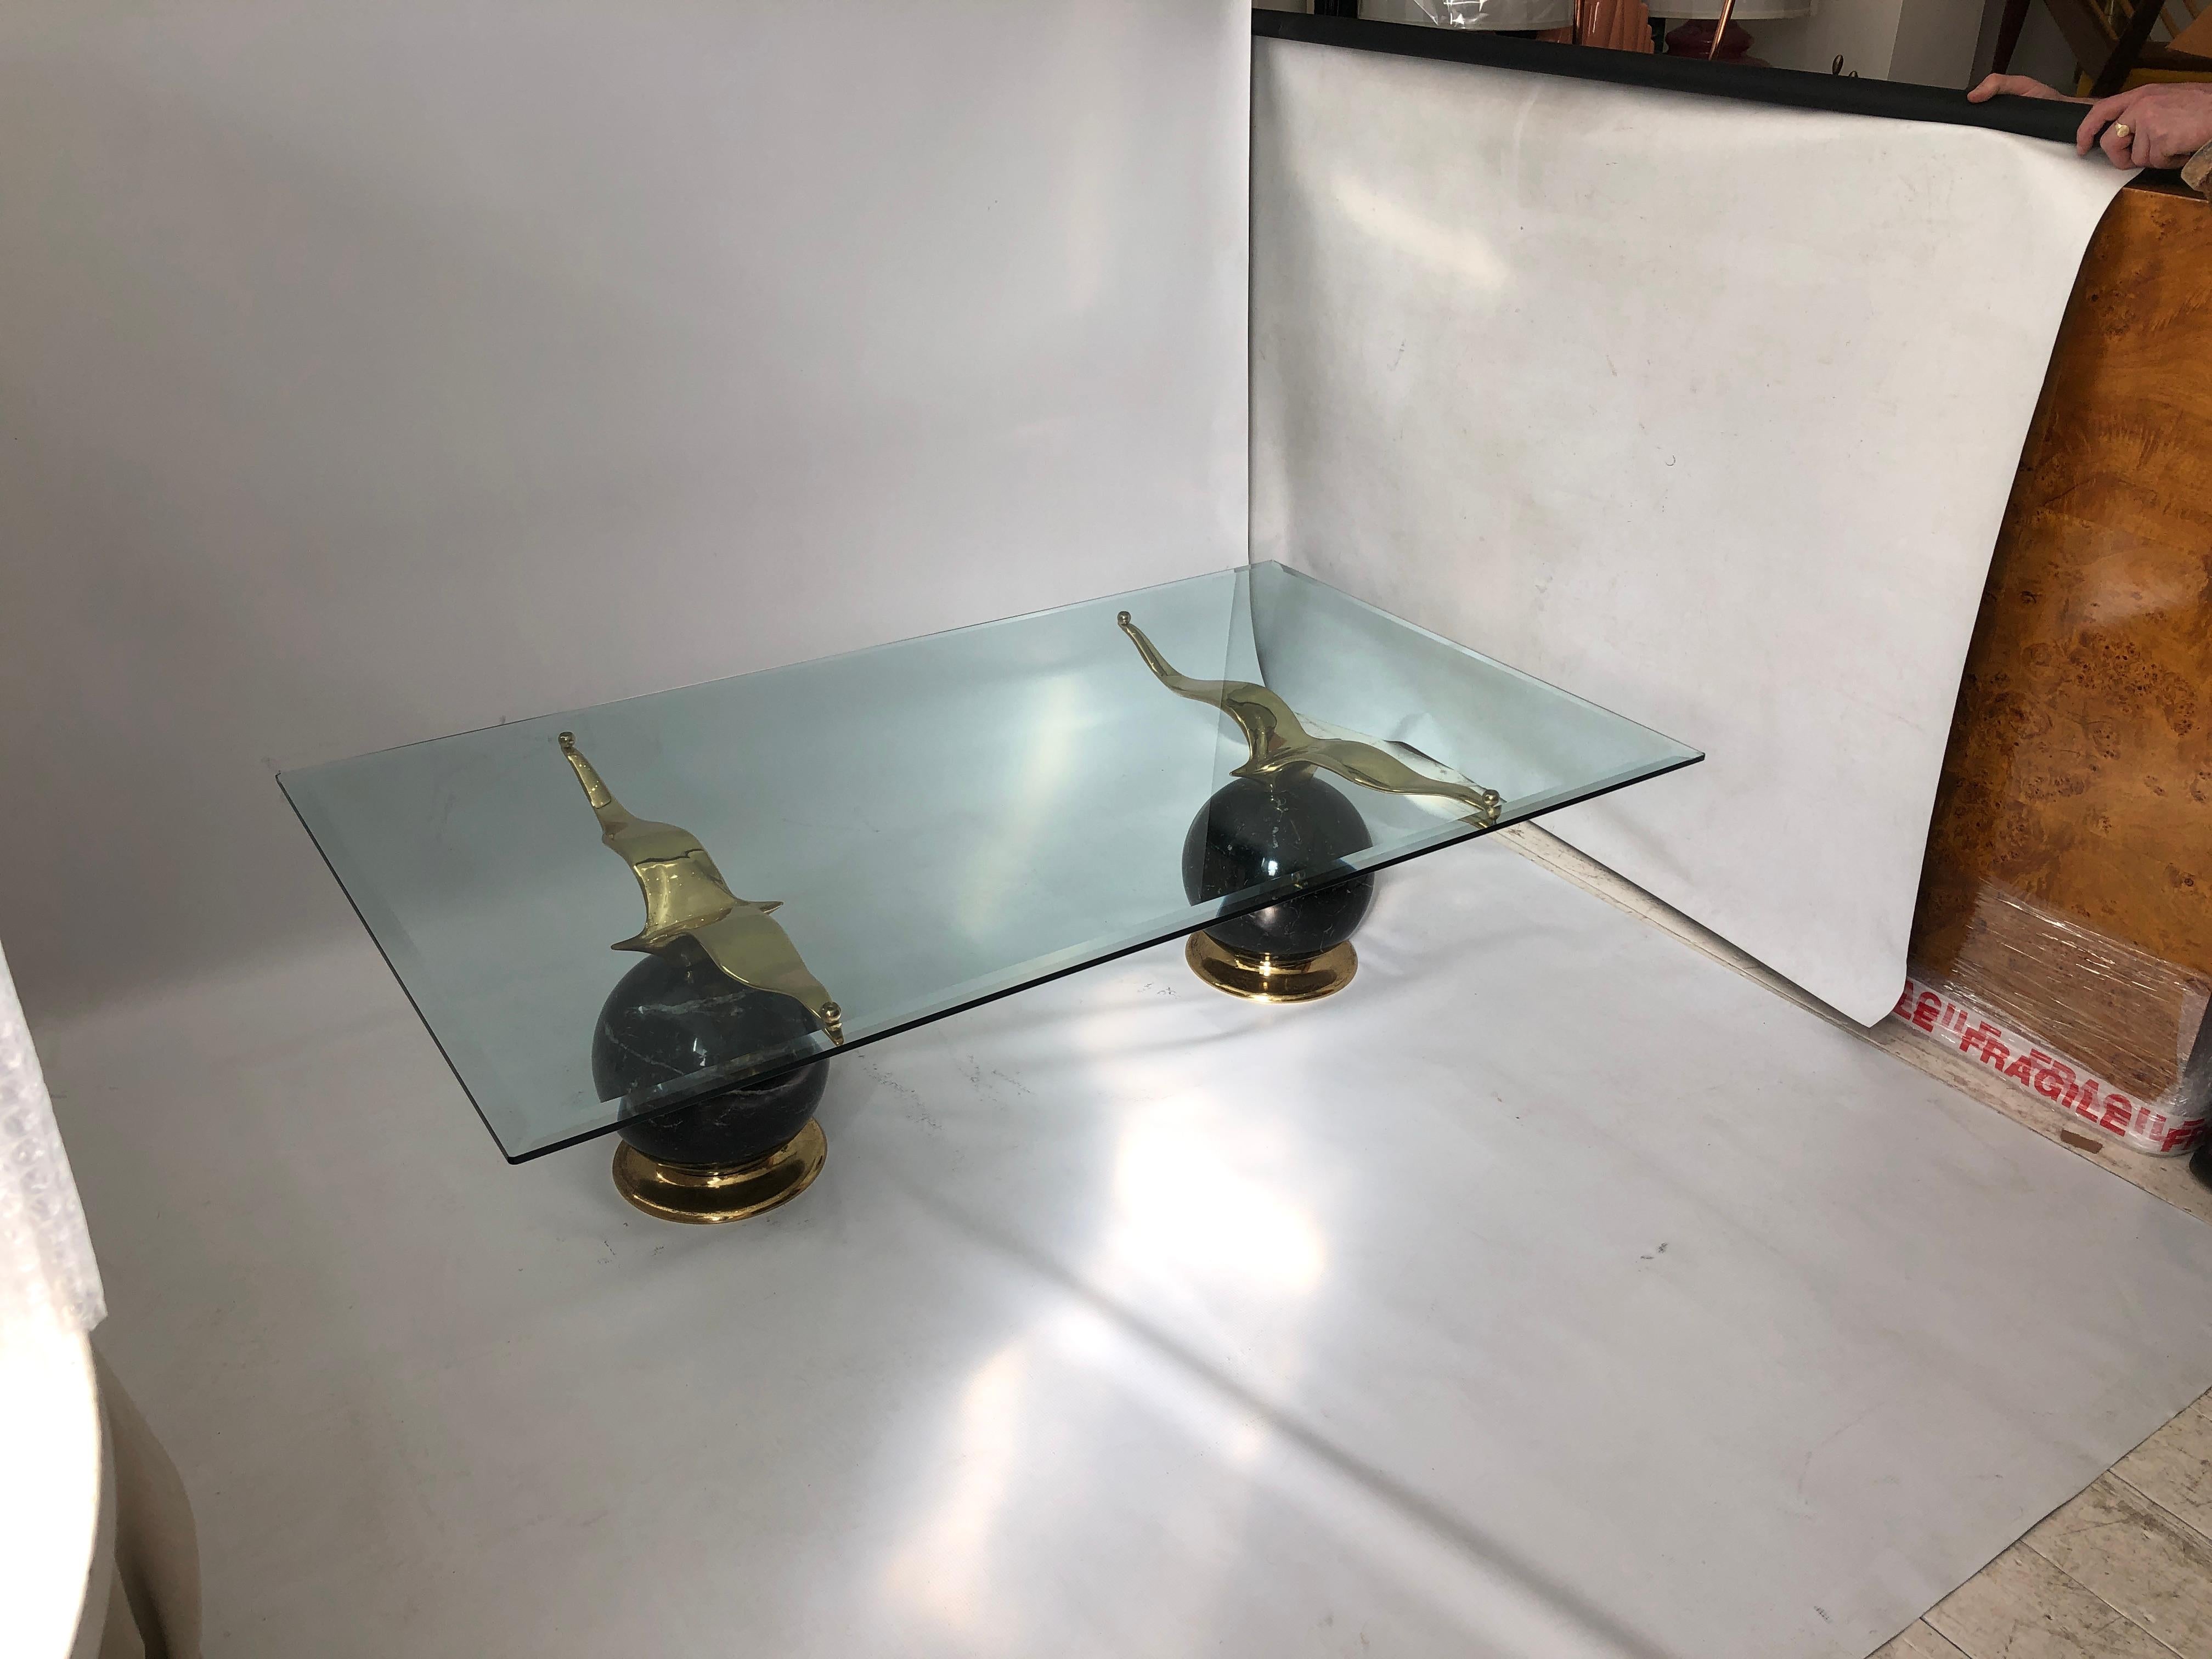 This gorgeous coffee table consists of two solid black marble spheres, atop which sits an elegant brass albatross figure. The two orbs hold a rectangular piece of bevelled glass. 

This piece was imported from a grand Milanese apartment, and exudes